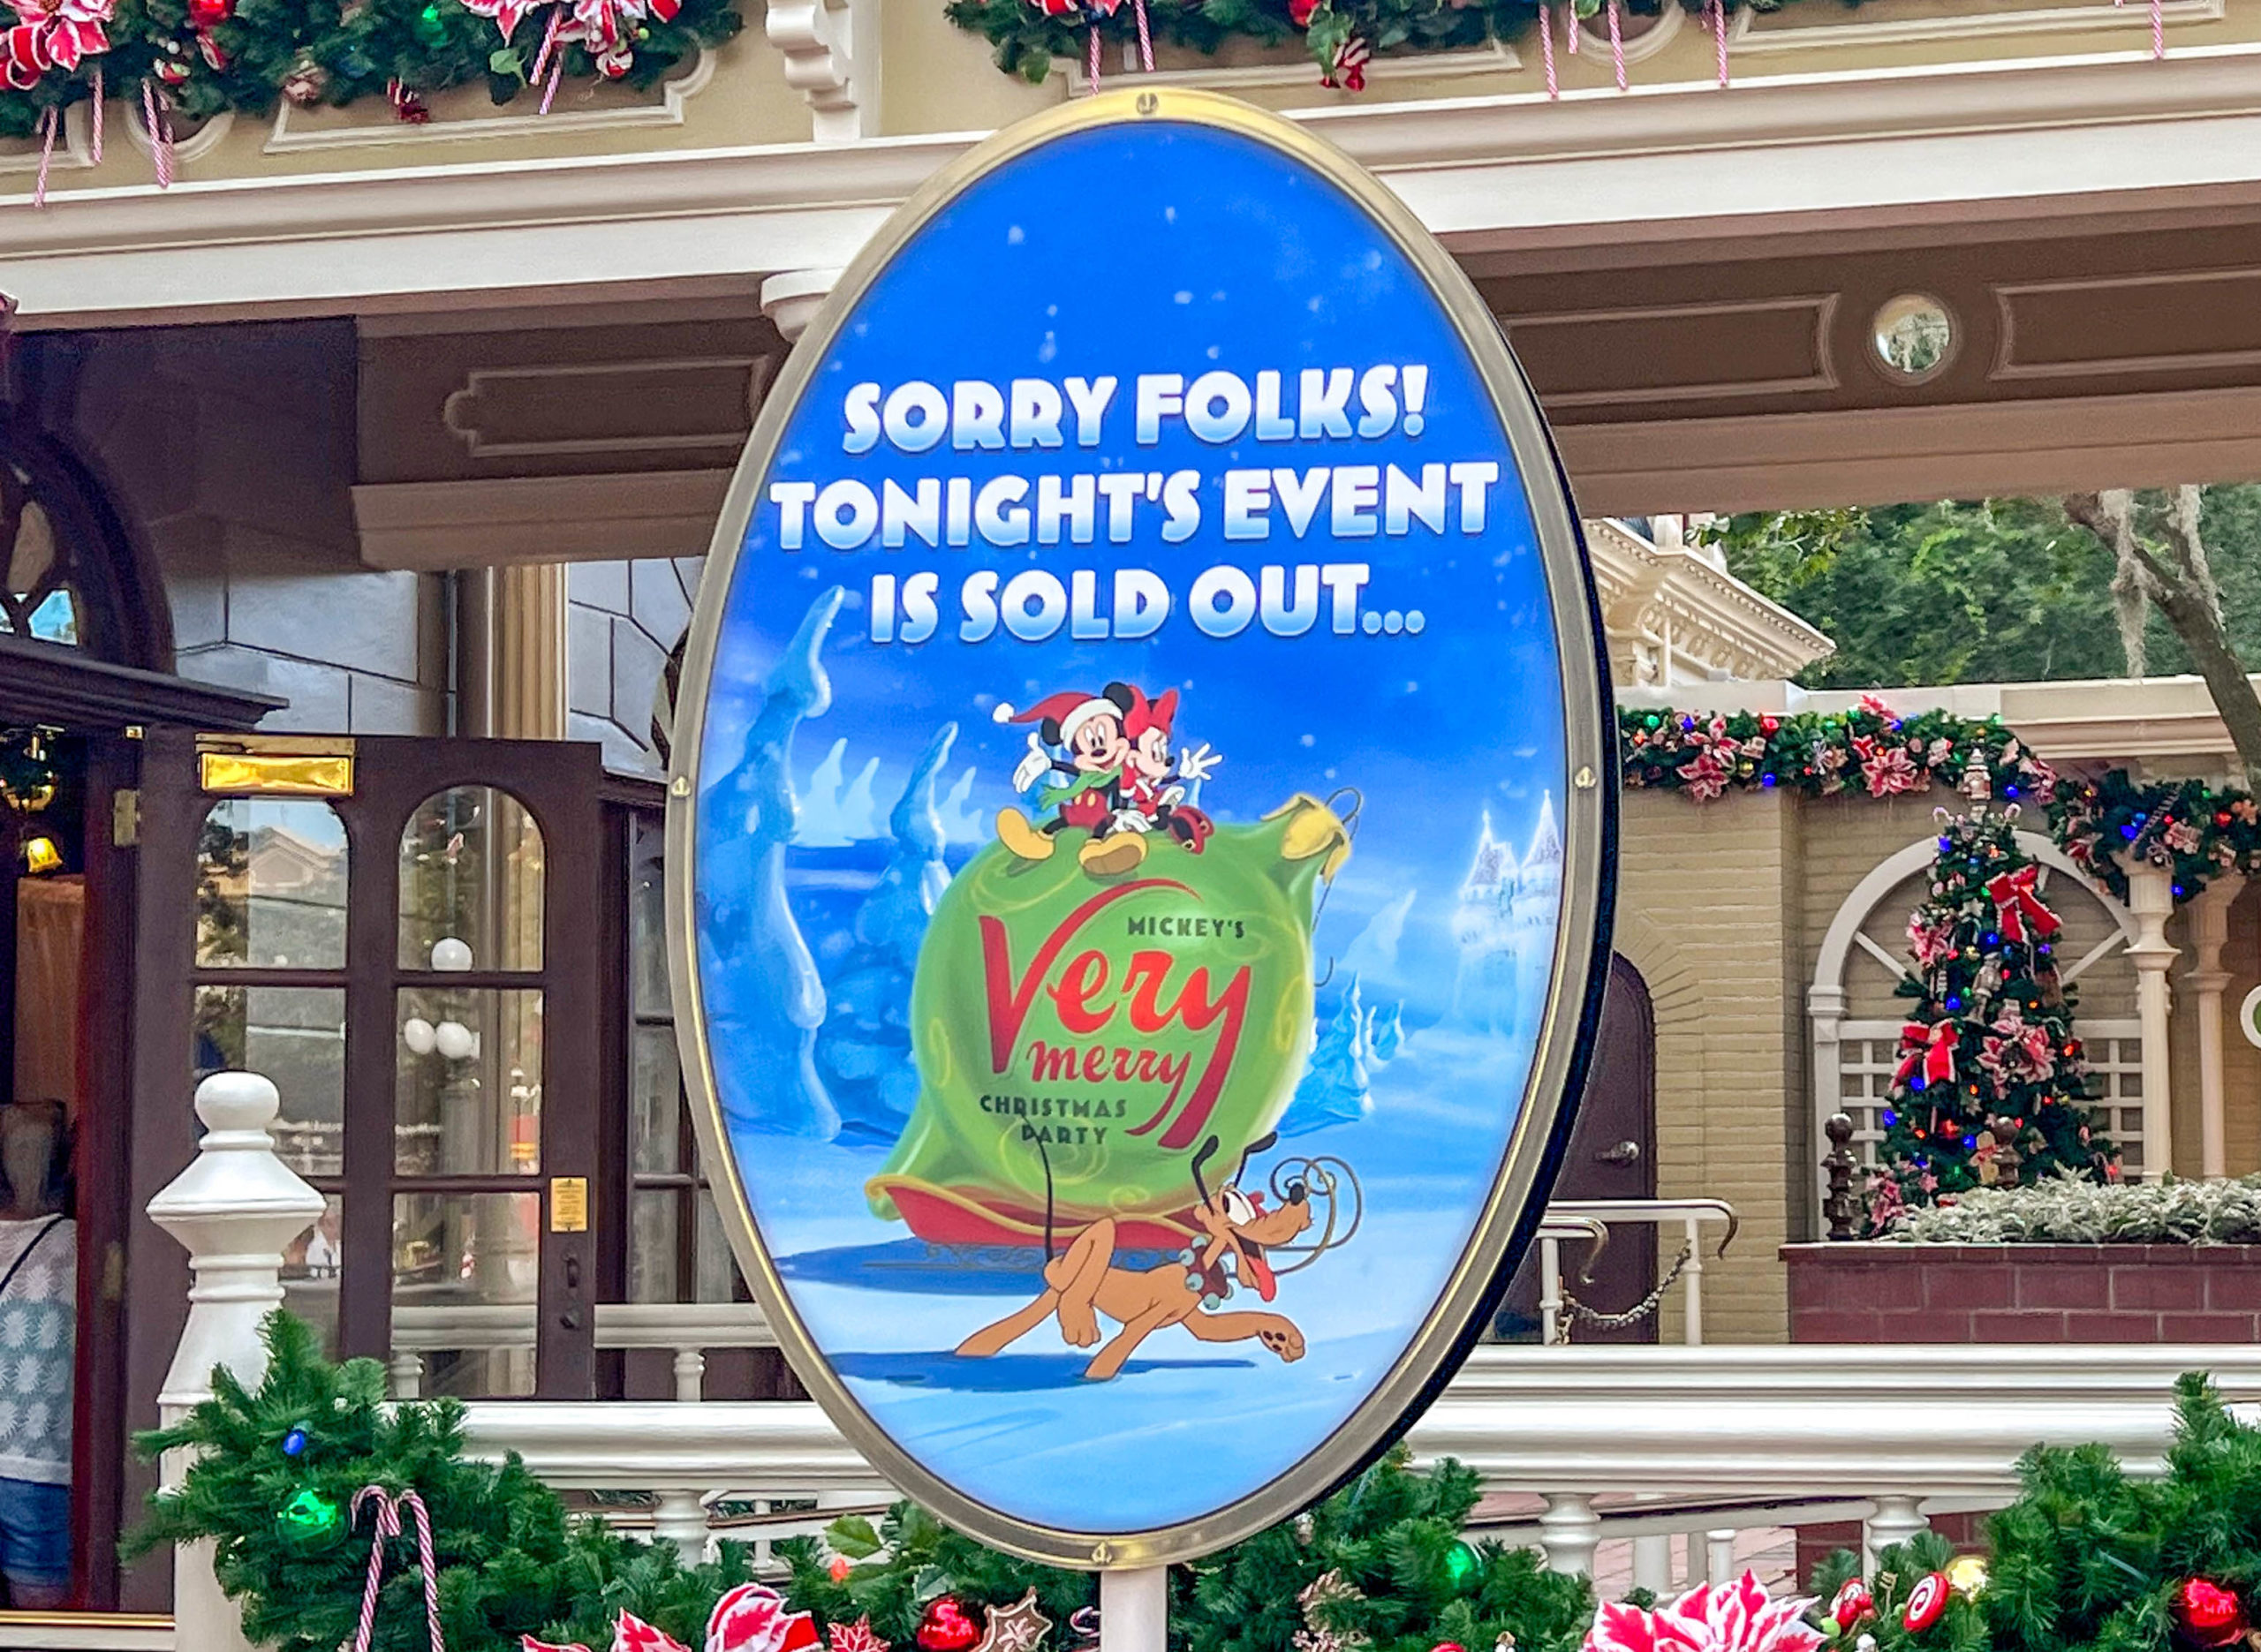 Mickey's Very Merry Christmas Party is sold out